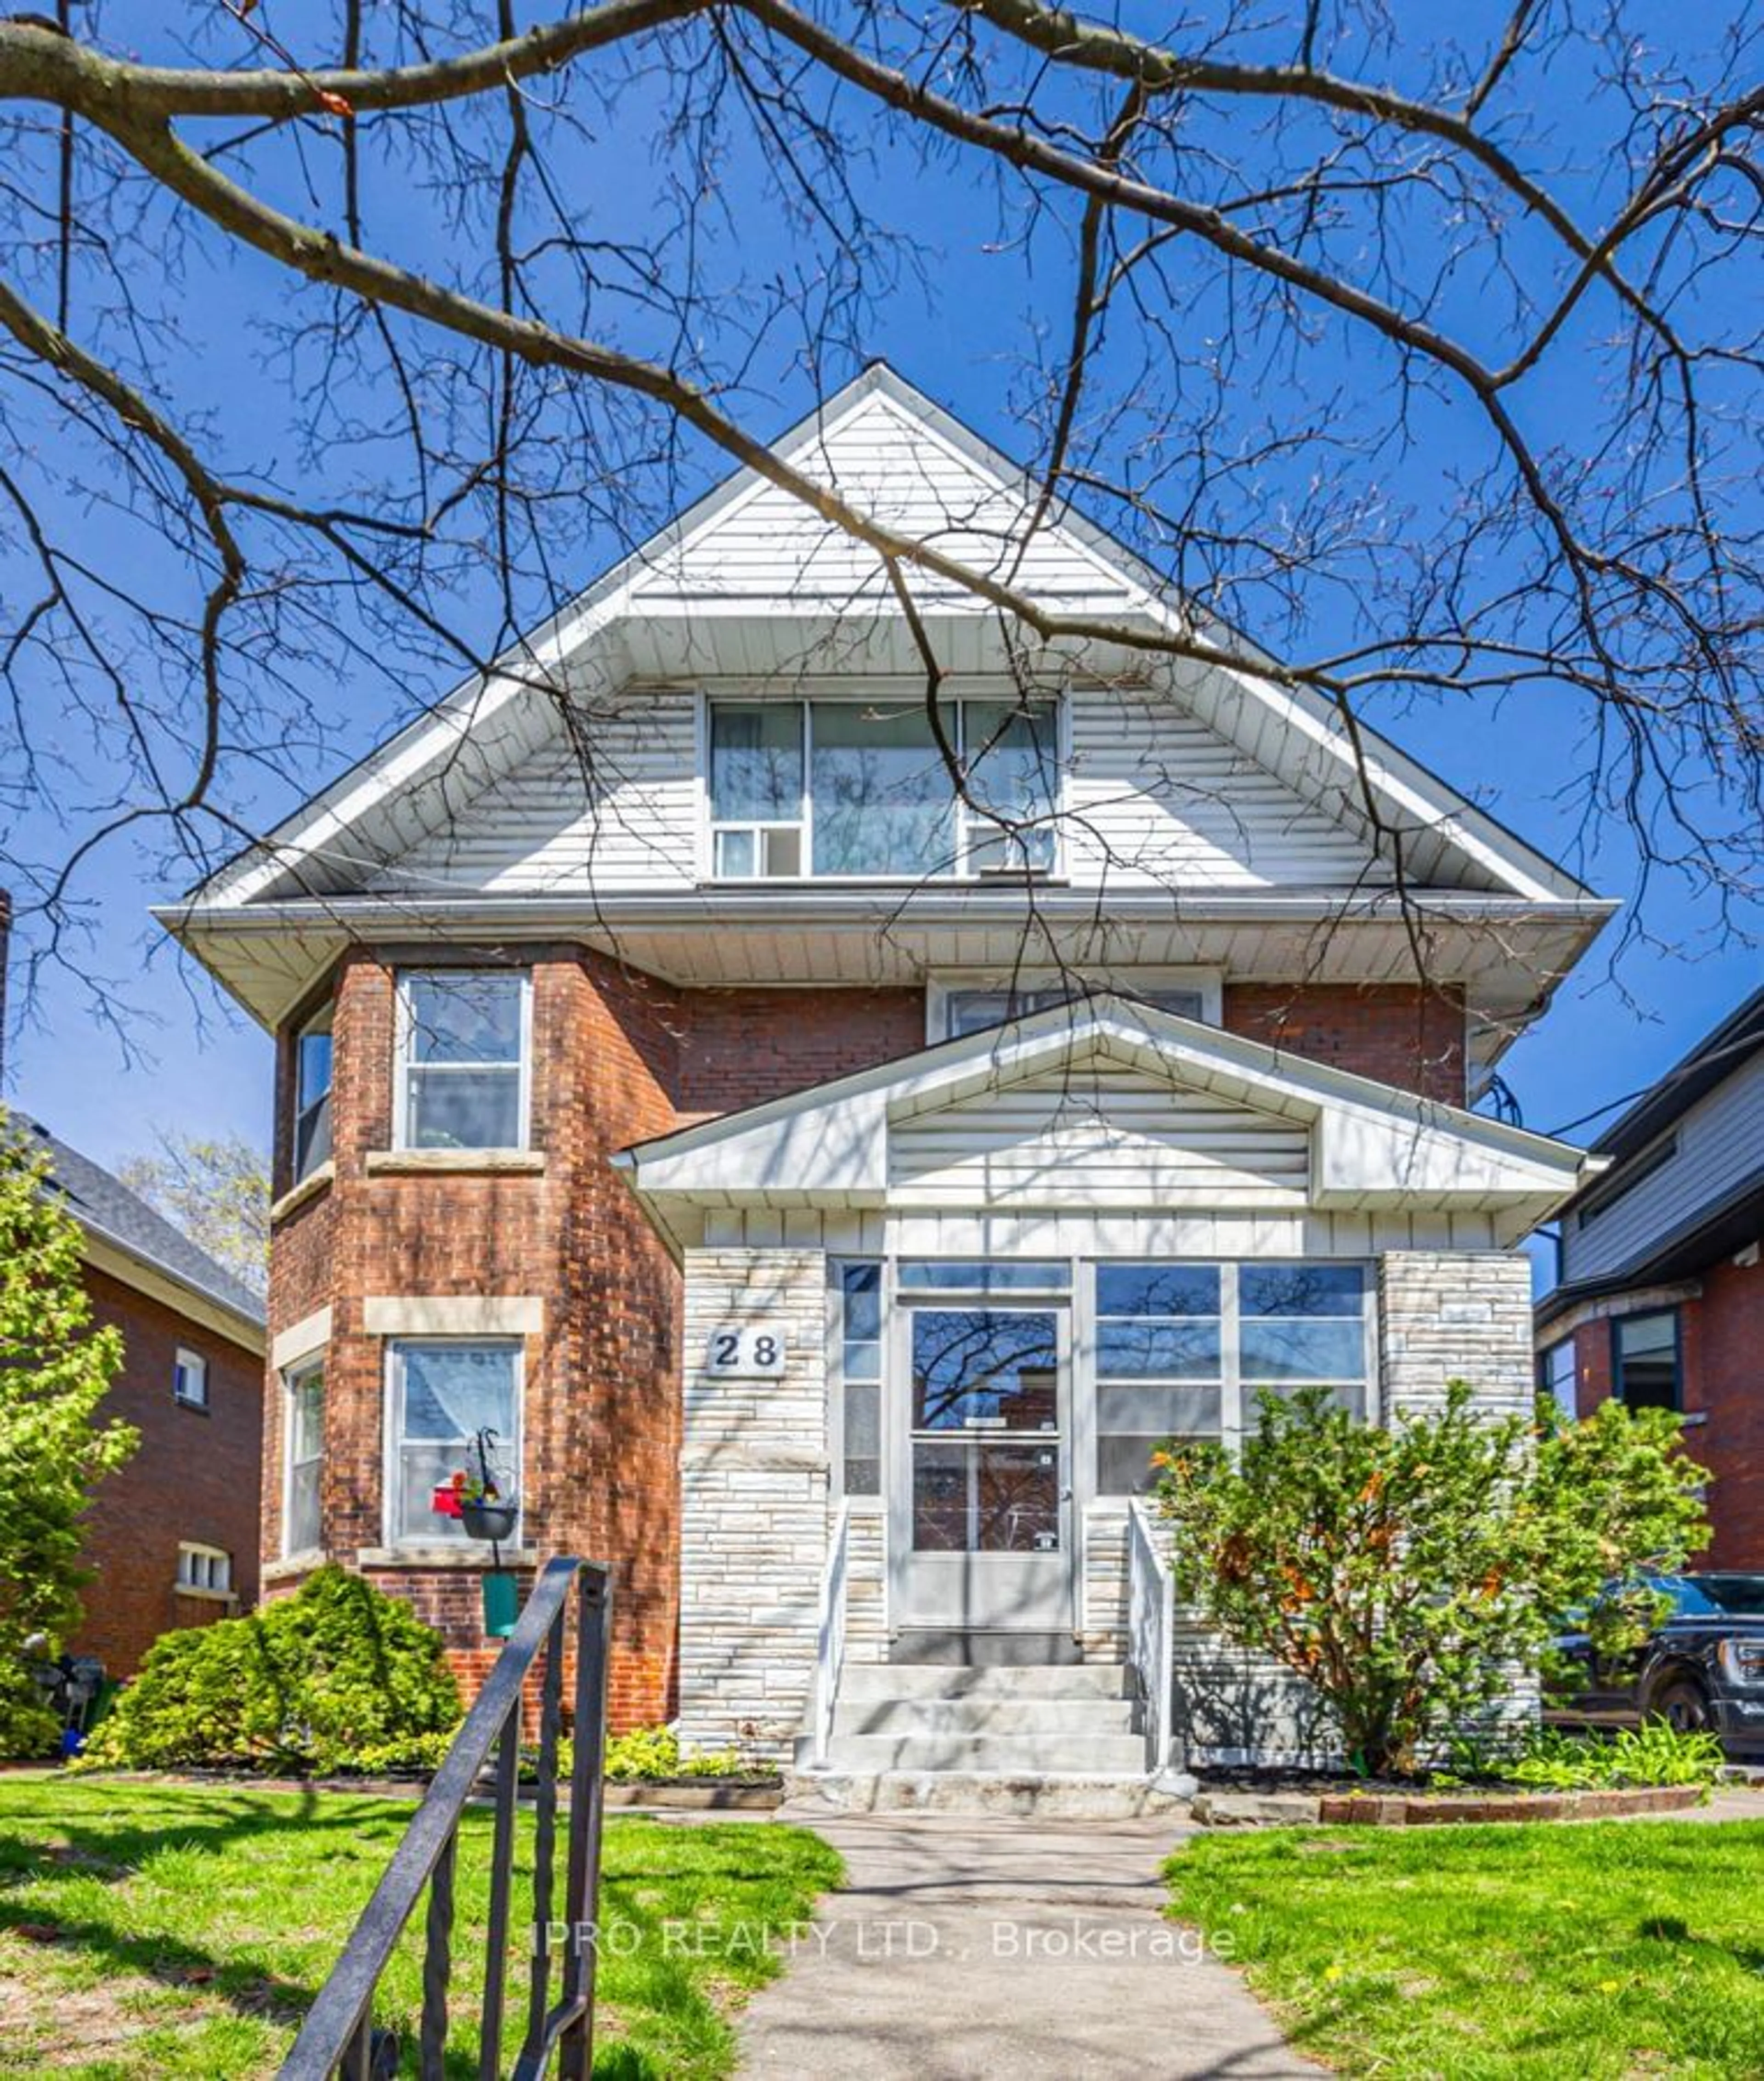 Home with brick exterior material for 28 Hurndale Ave, Toronto Ontario M4K 1R7